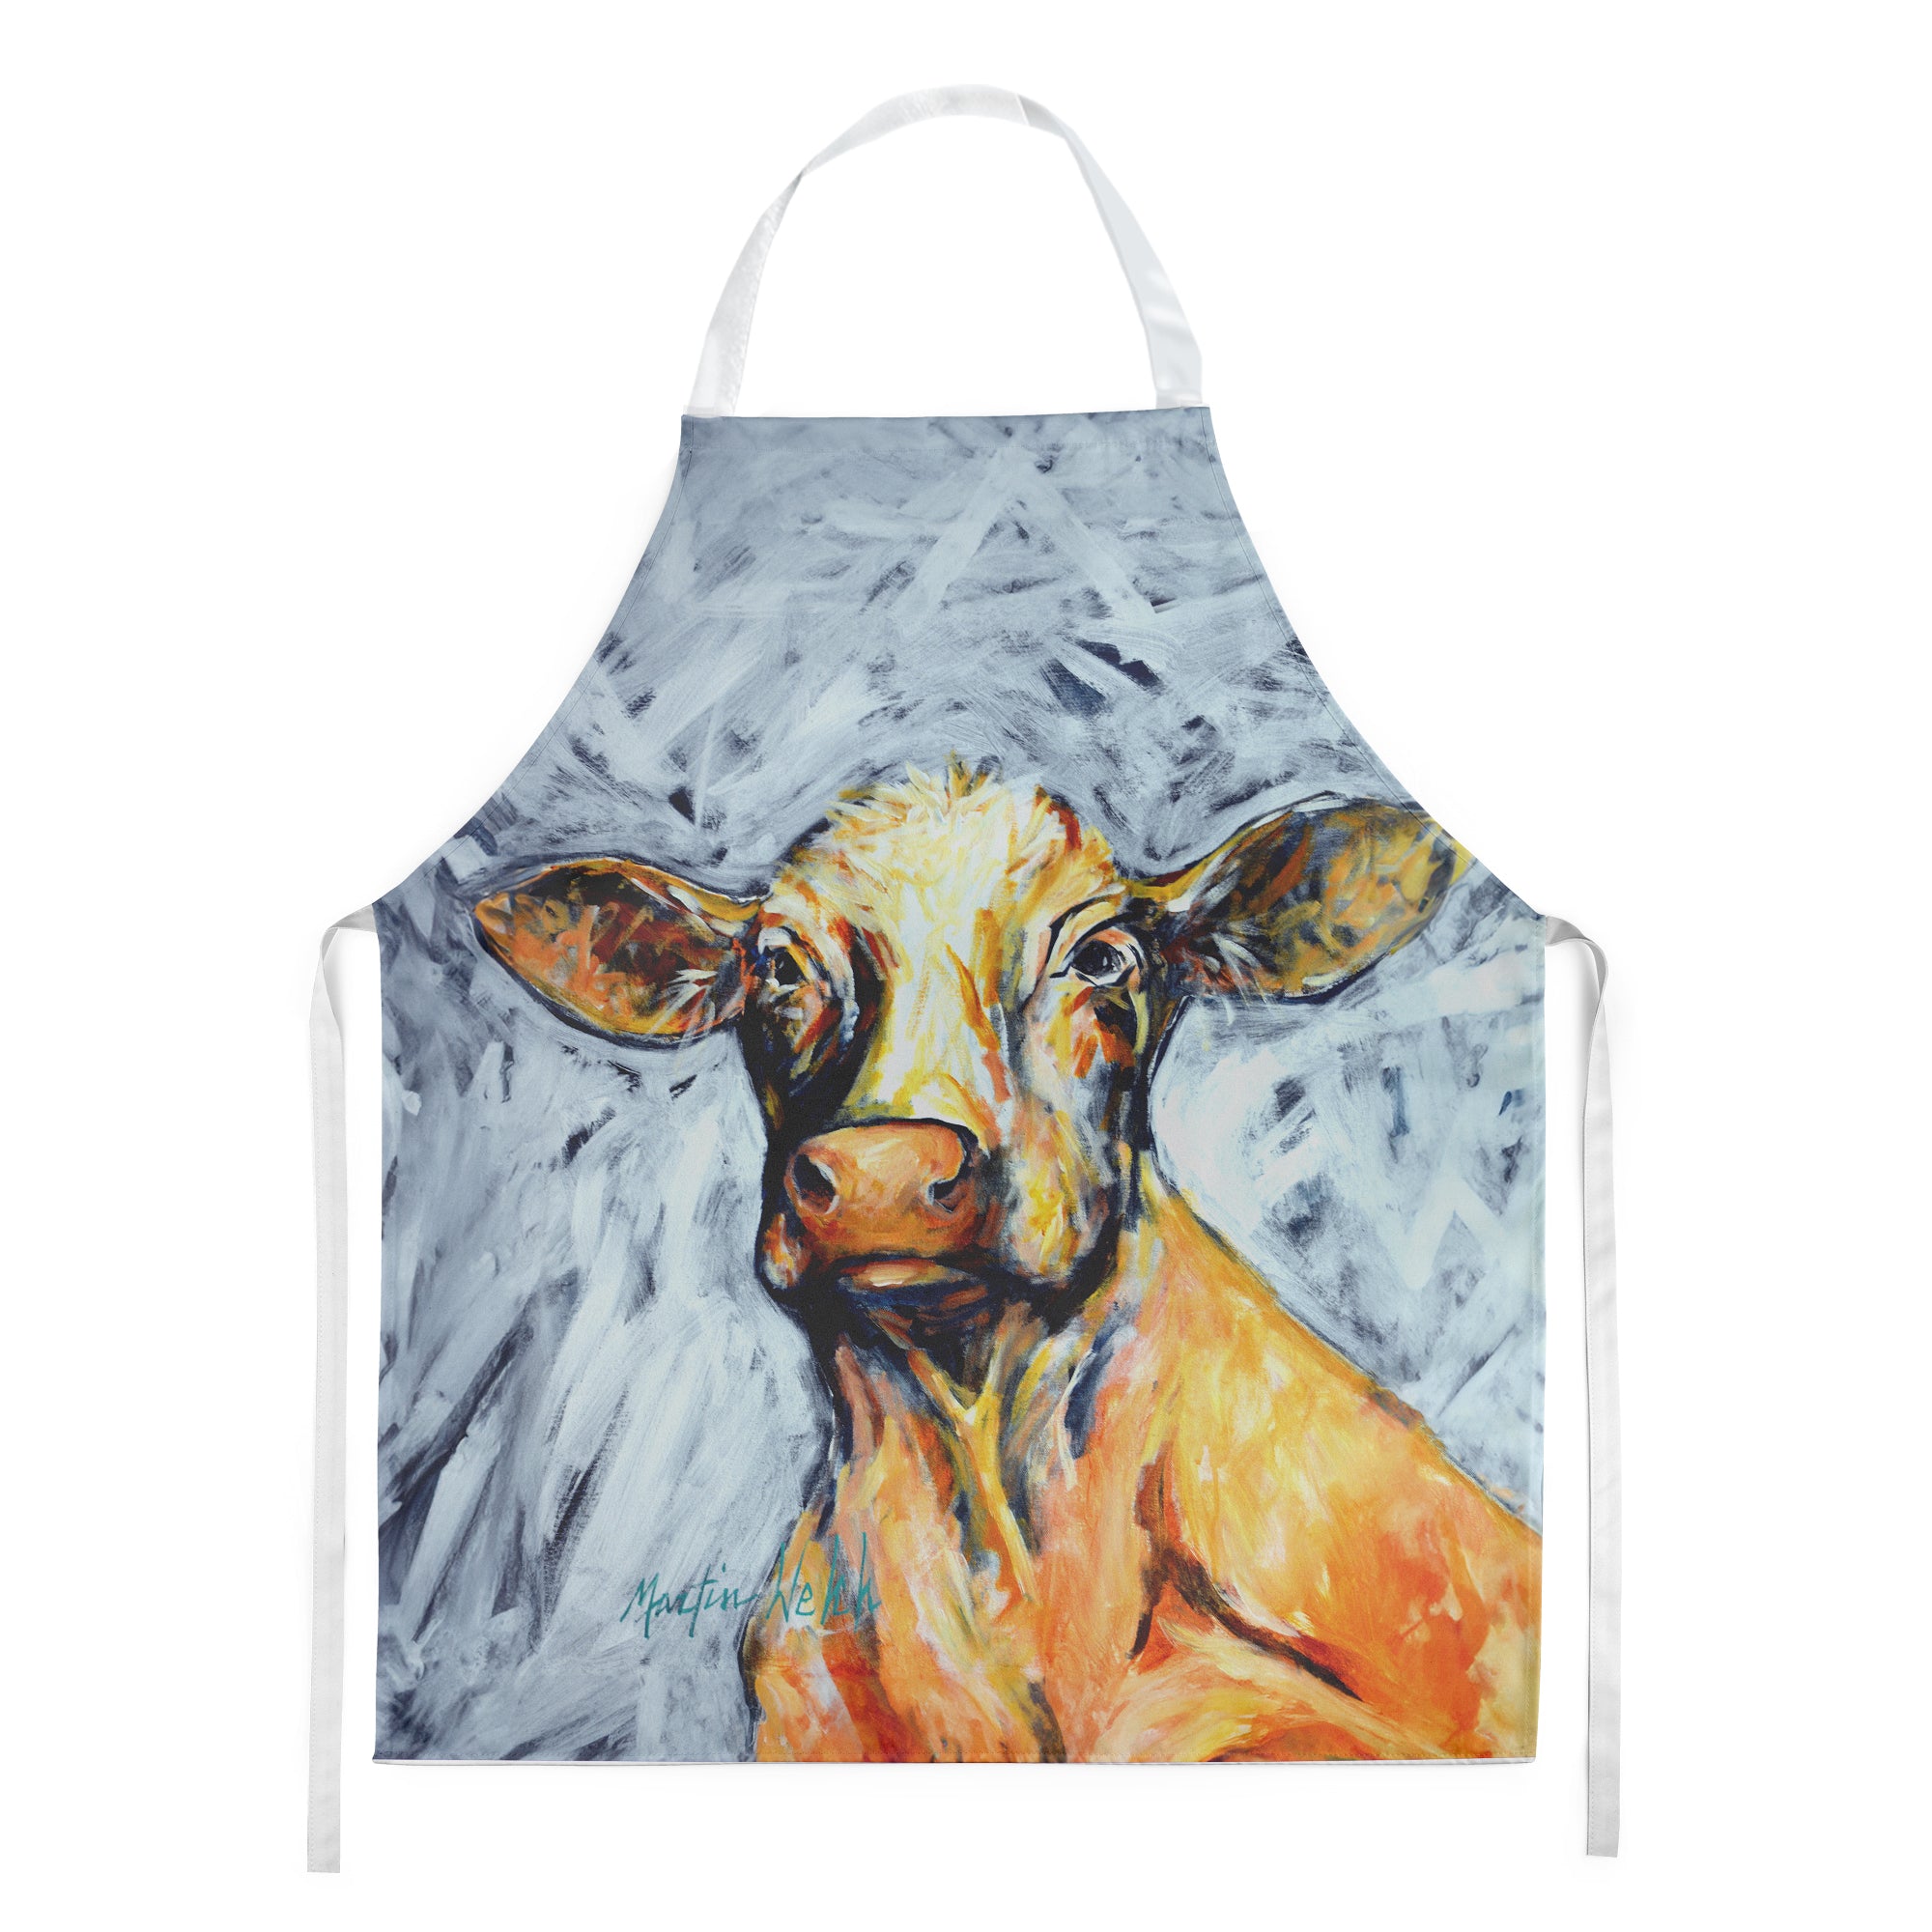 Buy this Moo Cow Apron